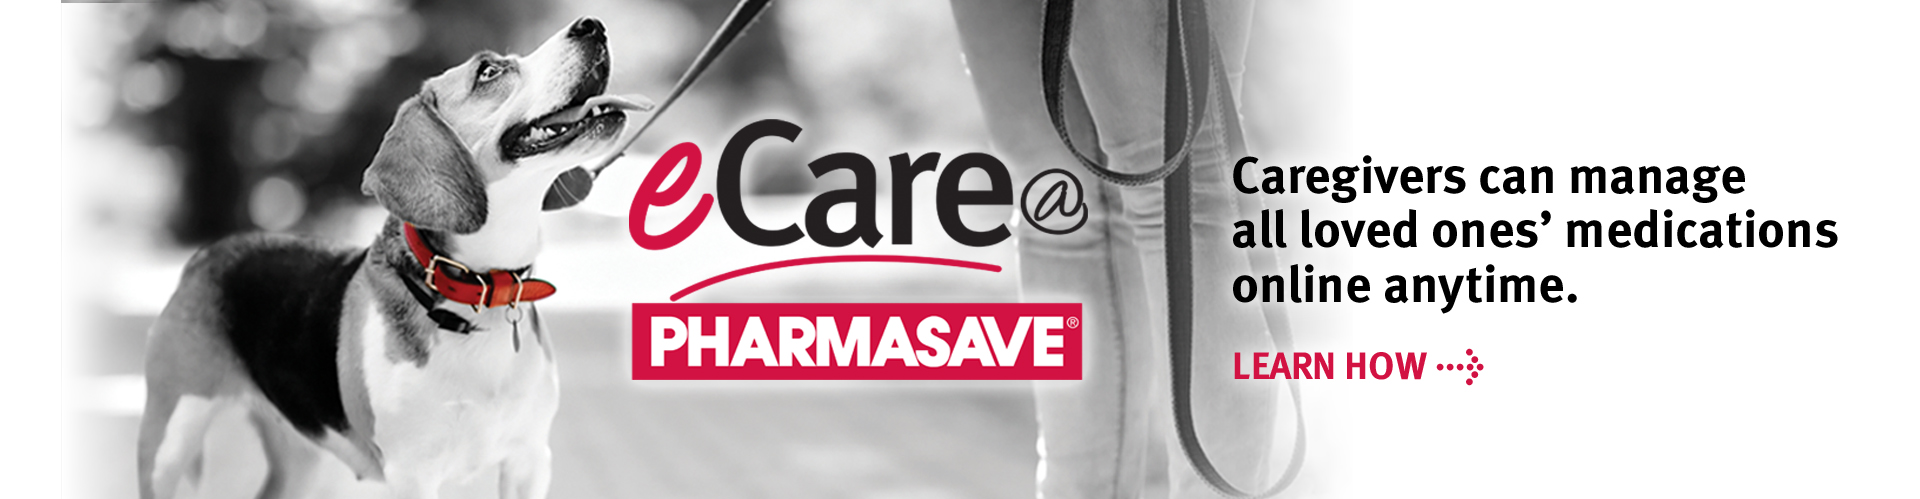 You can manage your loved ones' medication with out eCare@Pharmasave app. Download the app today.